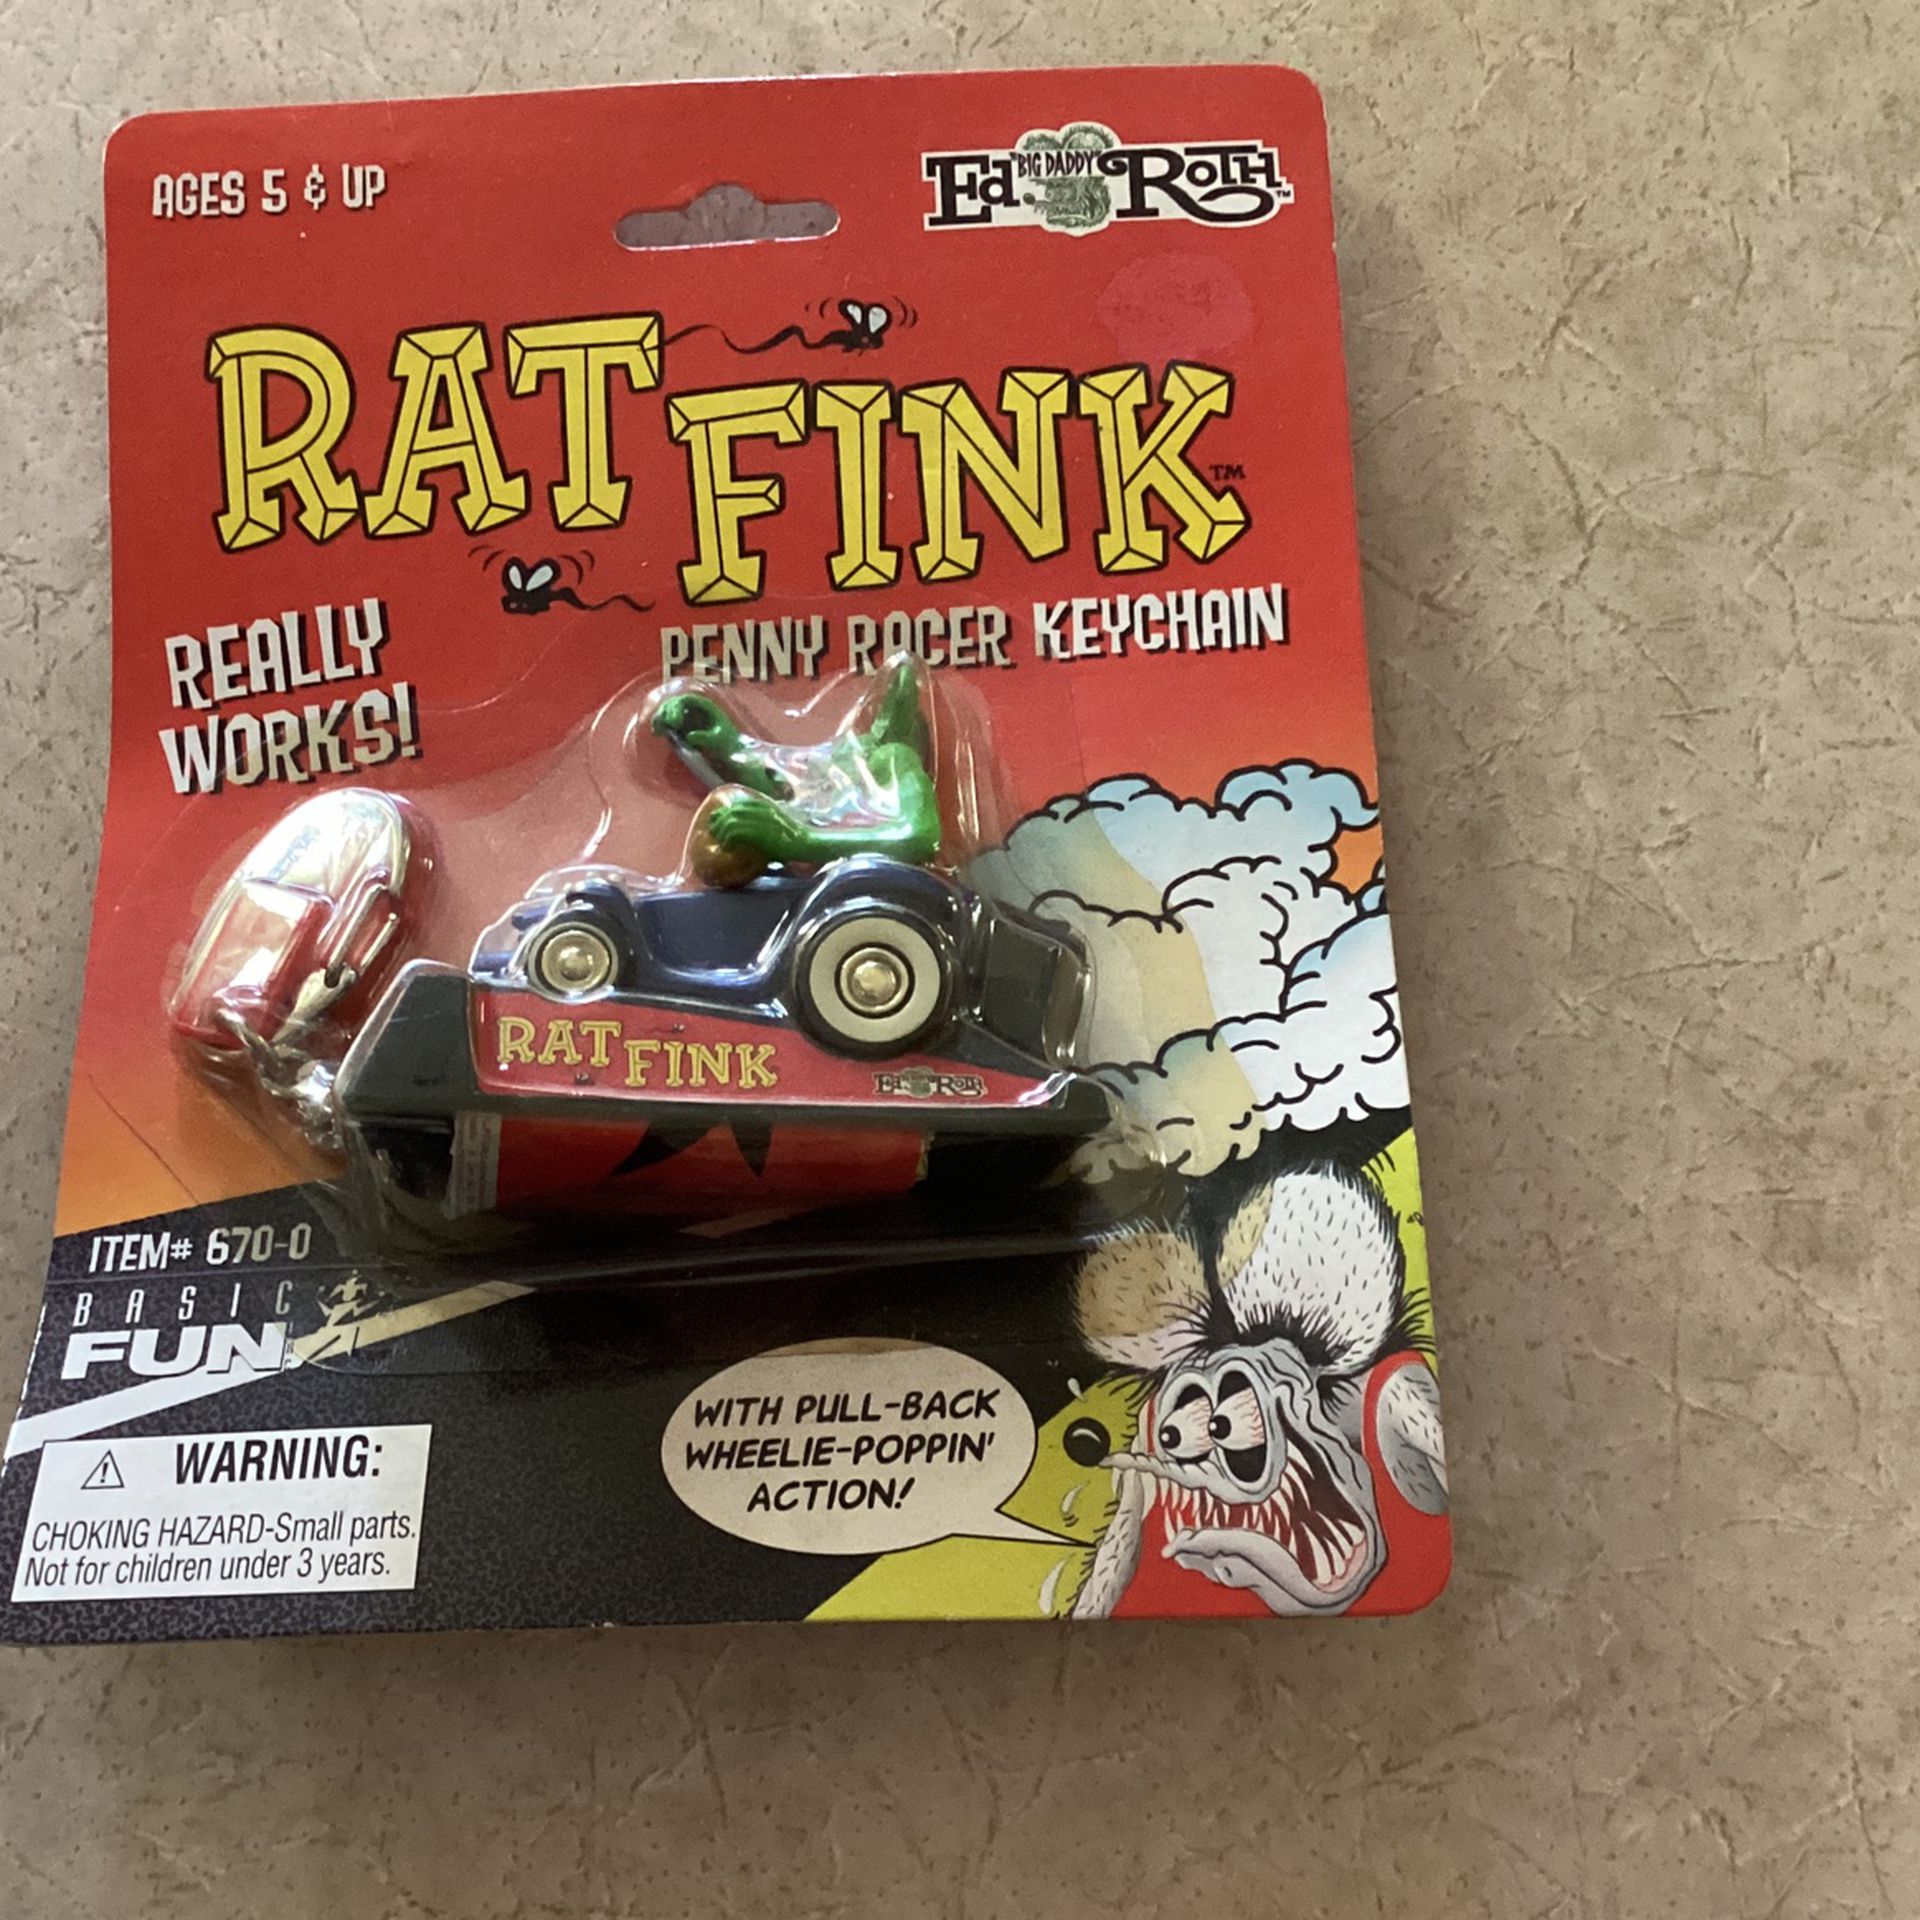 Rat Fink Penny Racer Keychain Ed Roth 2001 